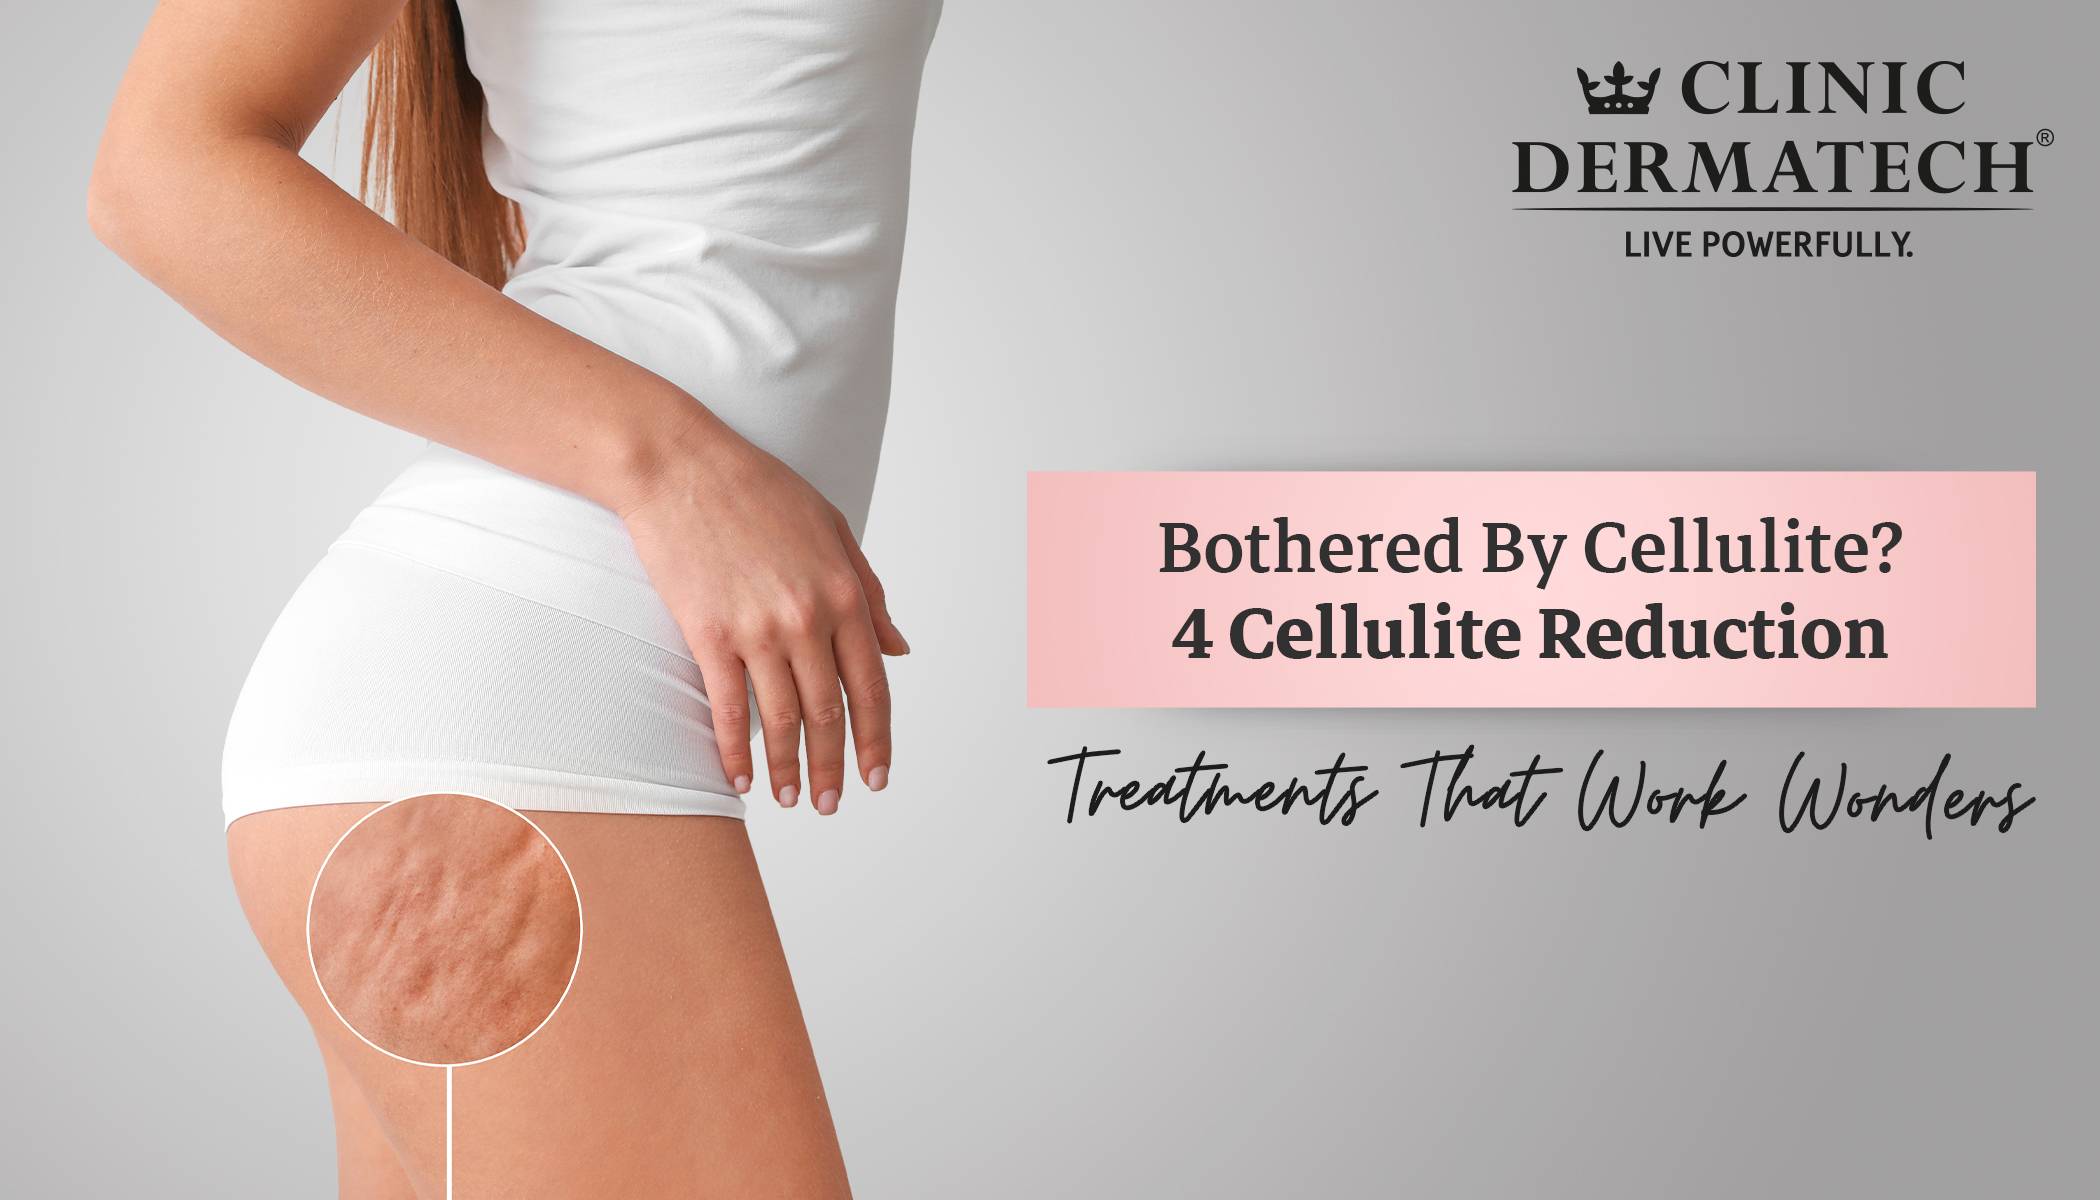 https://clinicdermatech.com/blog/wp-content/uploads/2023/04/Bothered-By-Cellulite-4-Cellulite-Reduction-Treatments-That-Work-Wonders.jpg